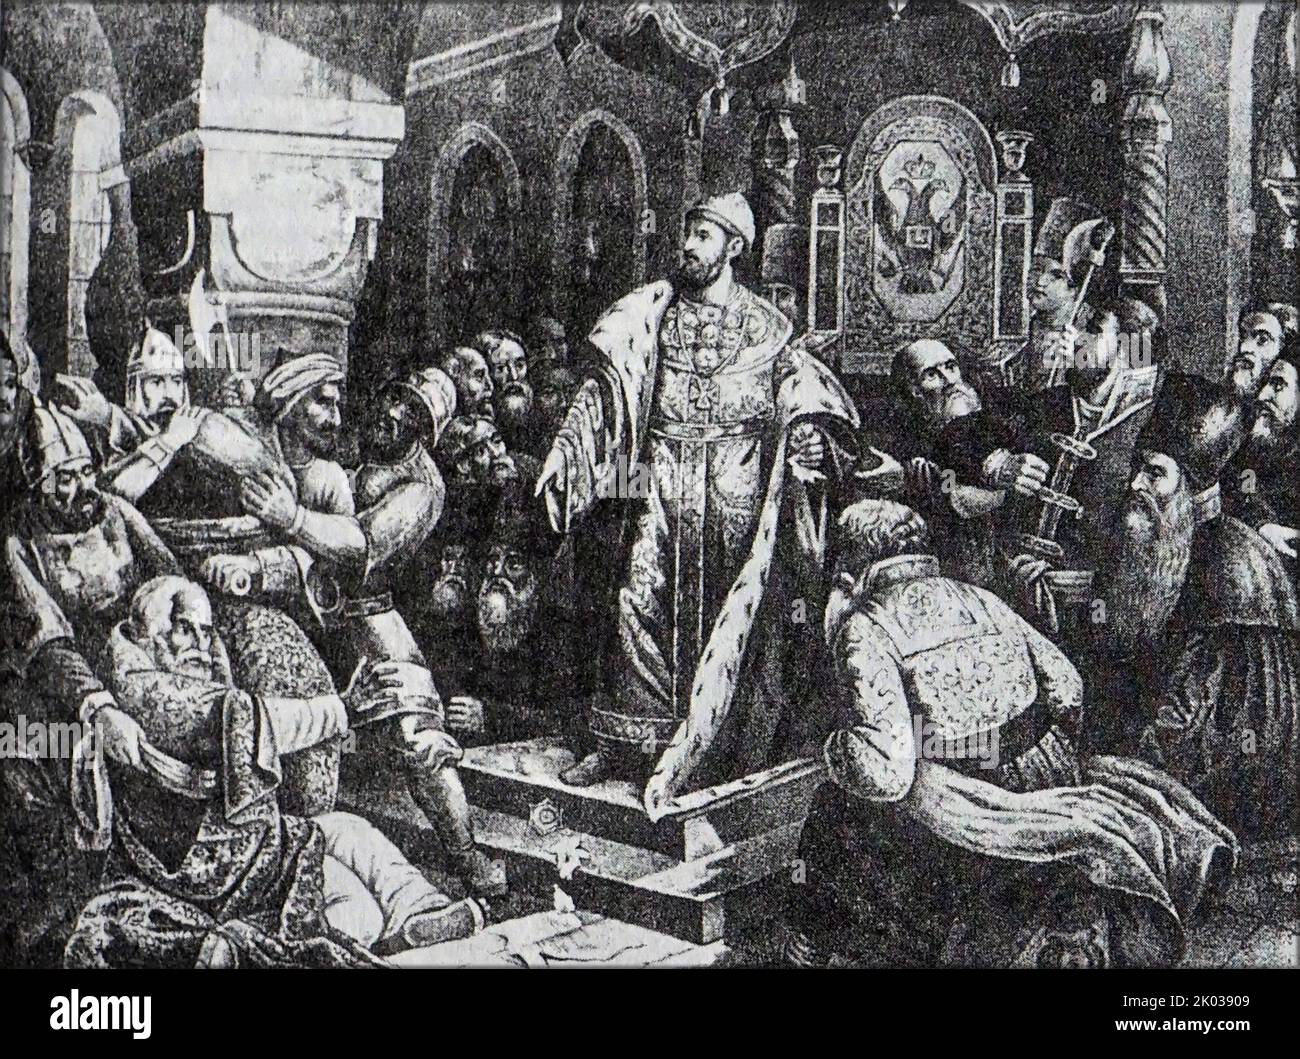 Ivan the Third tears apart the Khan's letter demanding tribute. Ivan III Vasilyevich (1440 - 1505), also known as Ivan the Great, was a Grand Prince of Moscow and Grand Prince of all Rus'. Ivan served as the co-ruler and regent for his blind father Vasily II from the mid-1450s before he officially ascended the throne in 1462. In 1476, Ivan refused to pay the customary tribute to the grand Khan Ahmed, and in 1480 Ahmed Khan organized a military campaign against Muscovy. Stock Photo